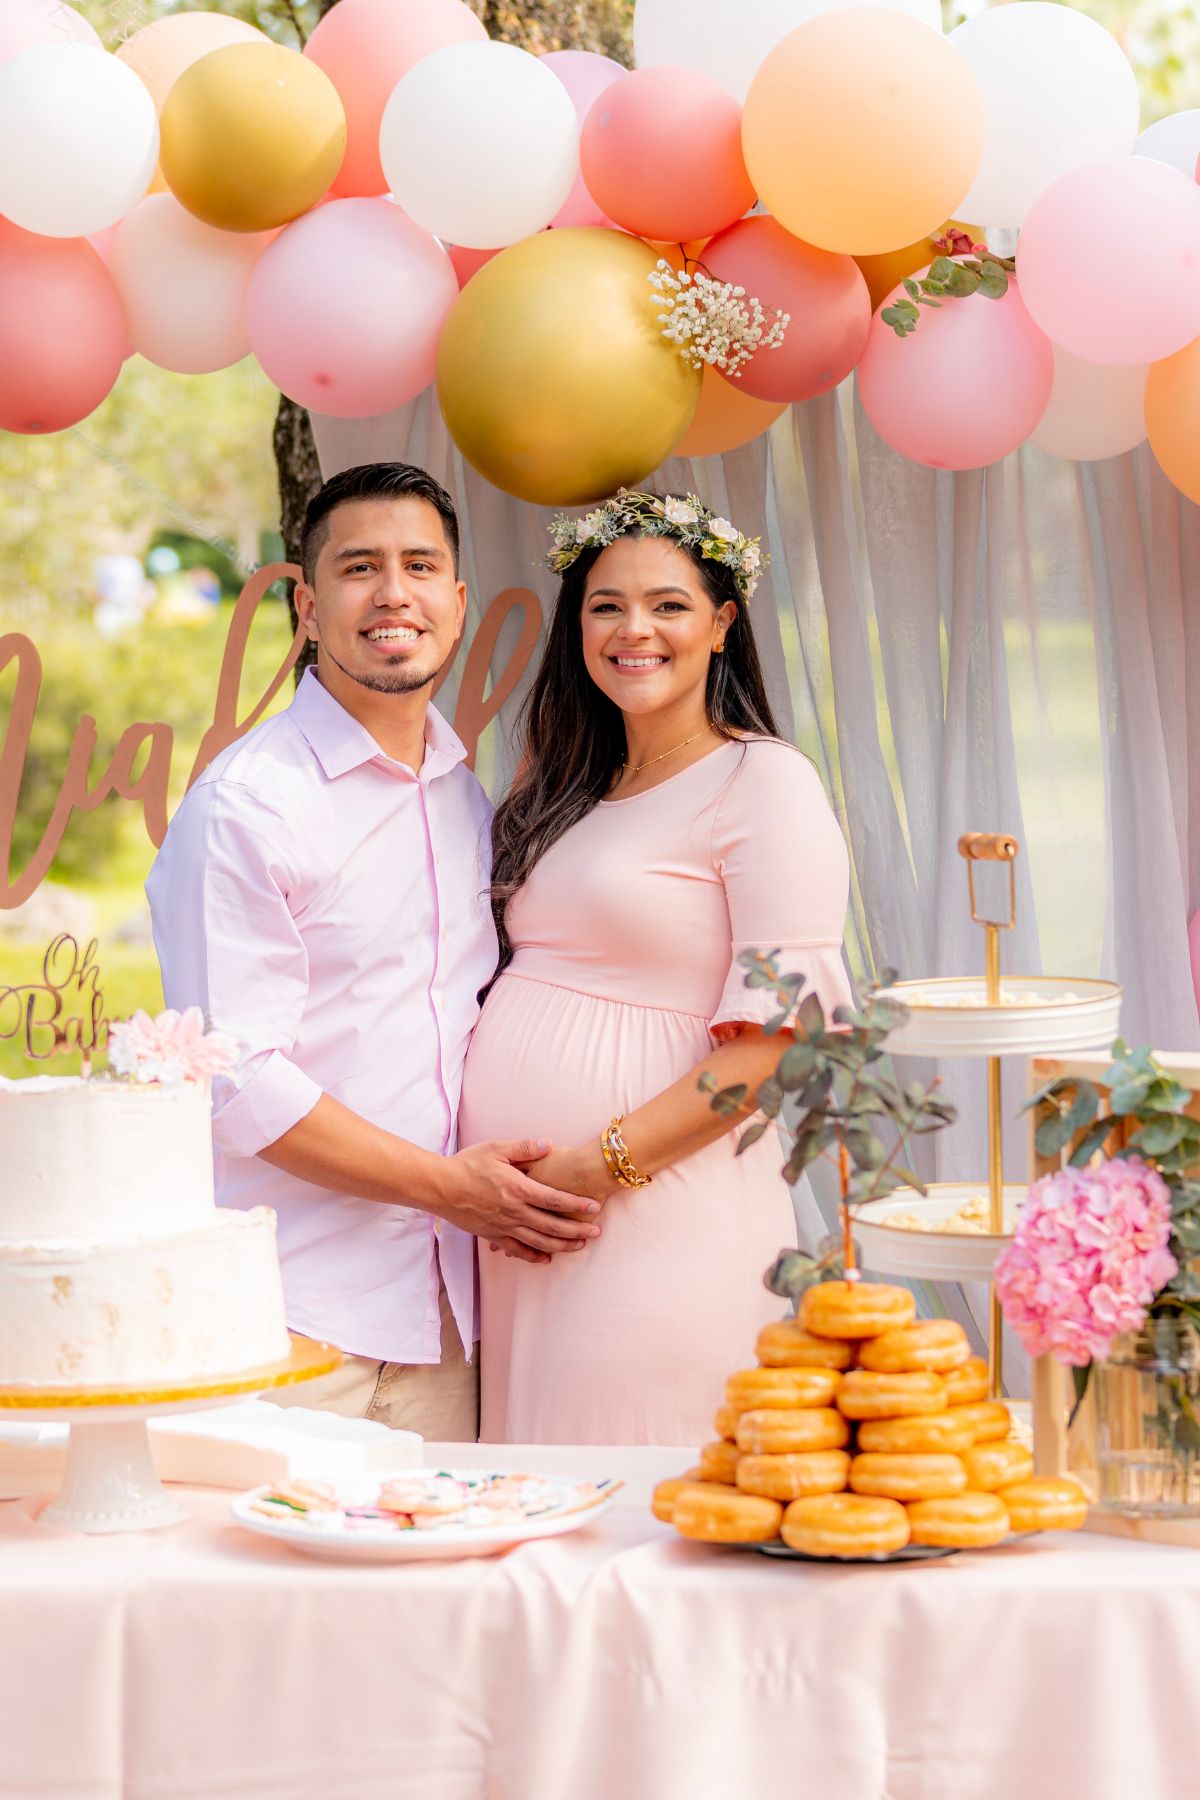 A couple wearing pink poses in front of pink and gold balloons at a baby shower.